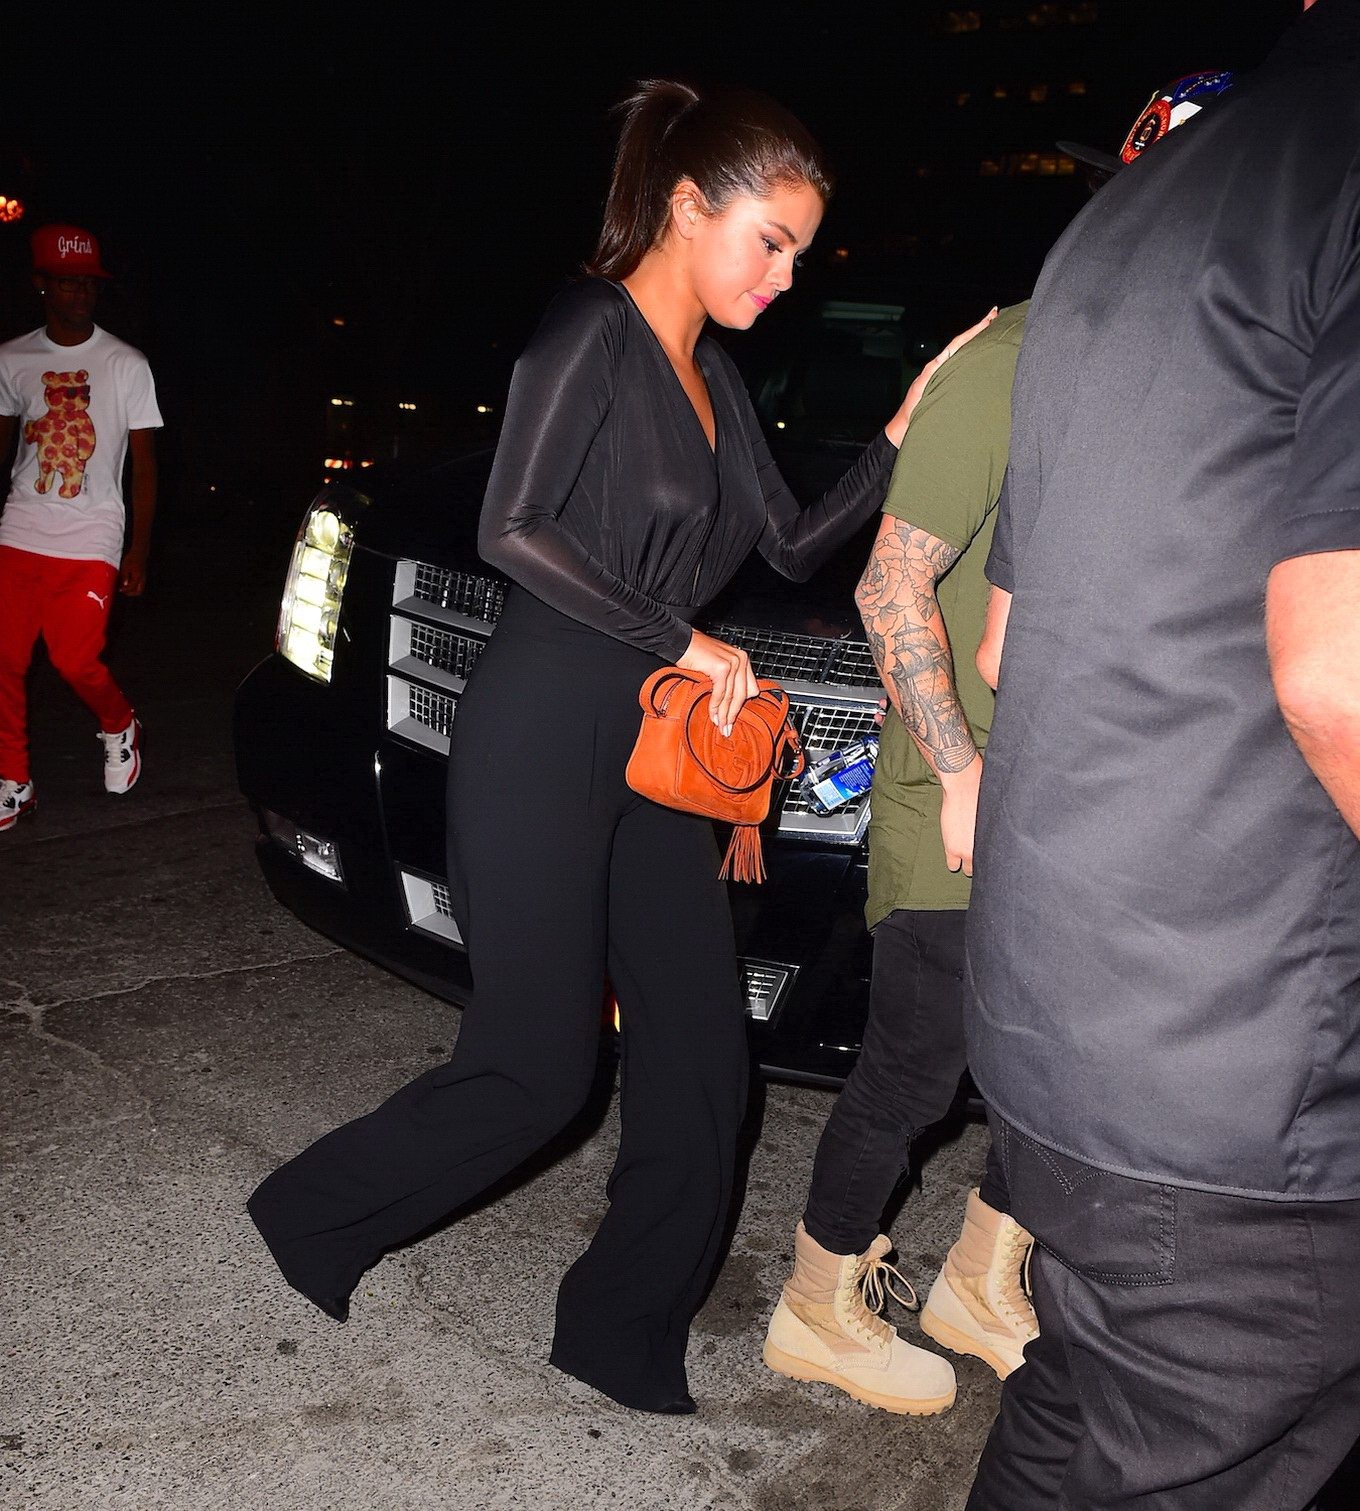 Selena Gomez braless wearing a wide open shirt on a night out #75160622